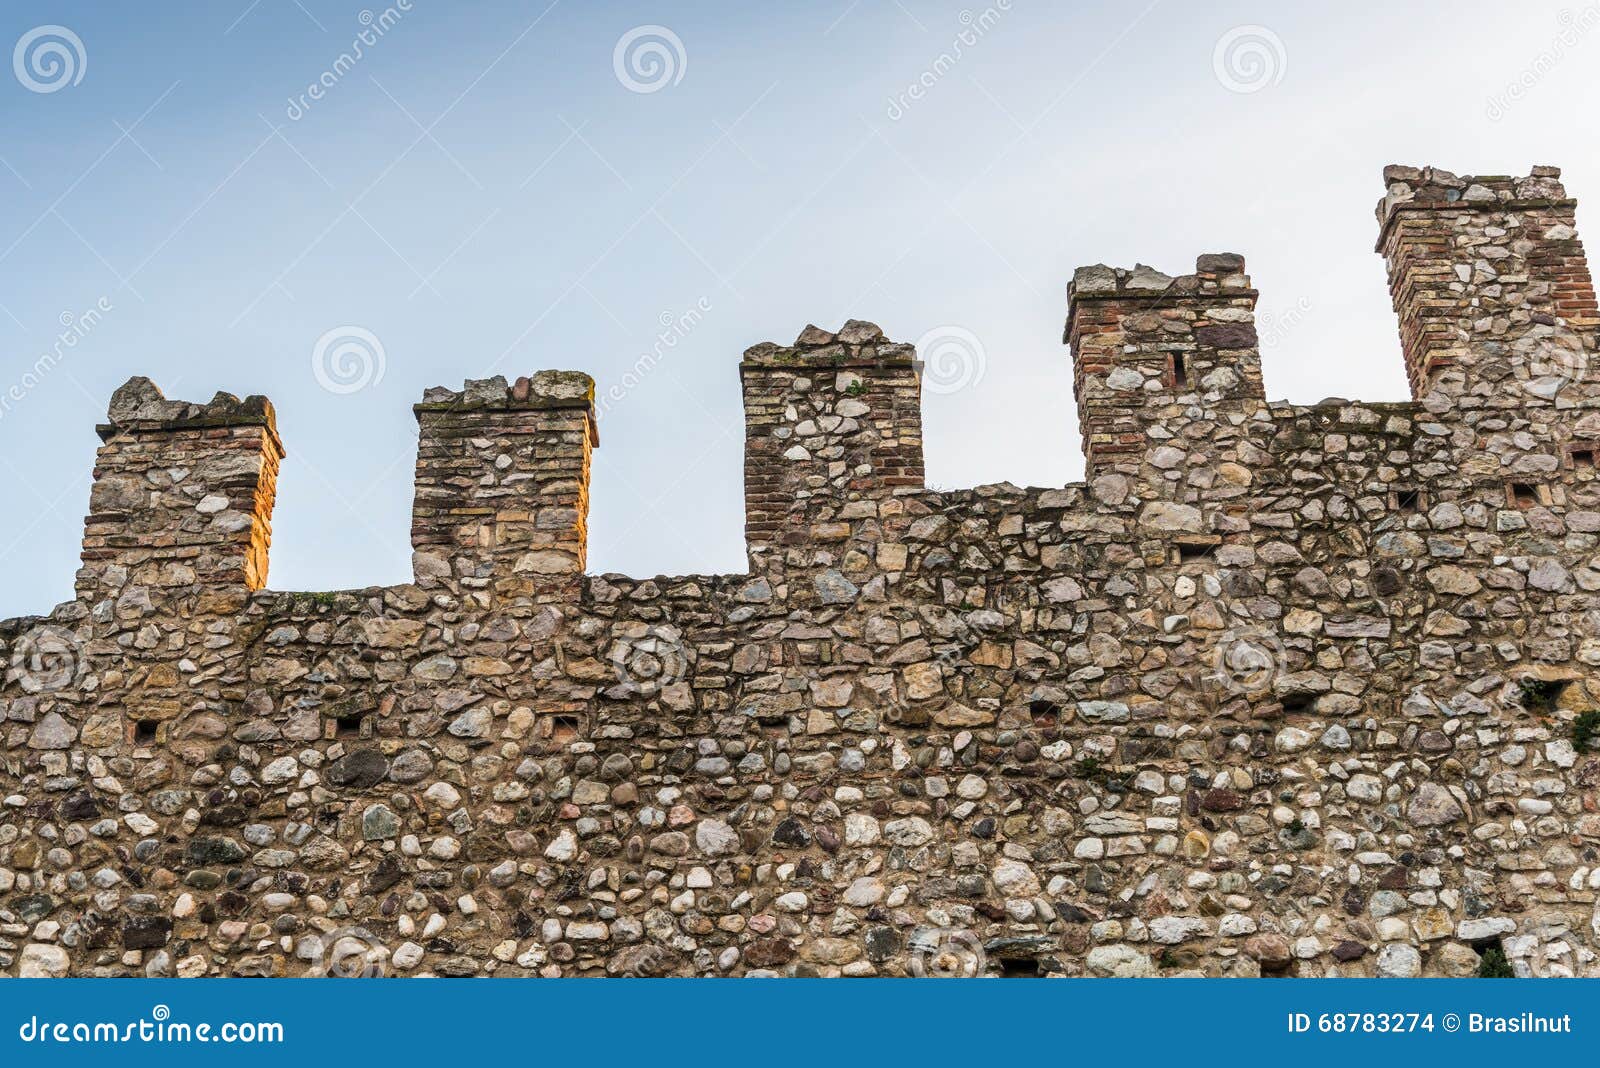 Exterior of Medieval Castle Showing Battlements. Isolated on White